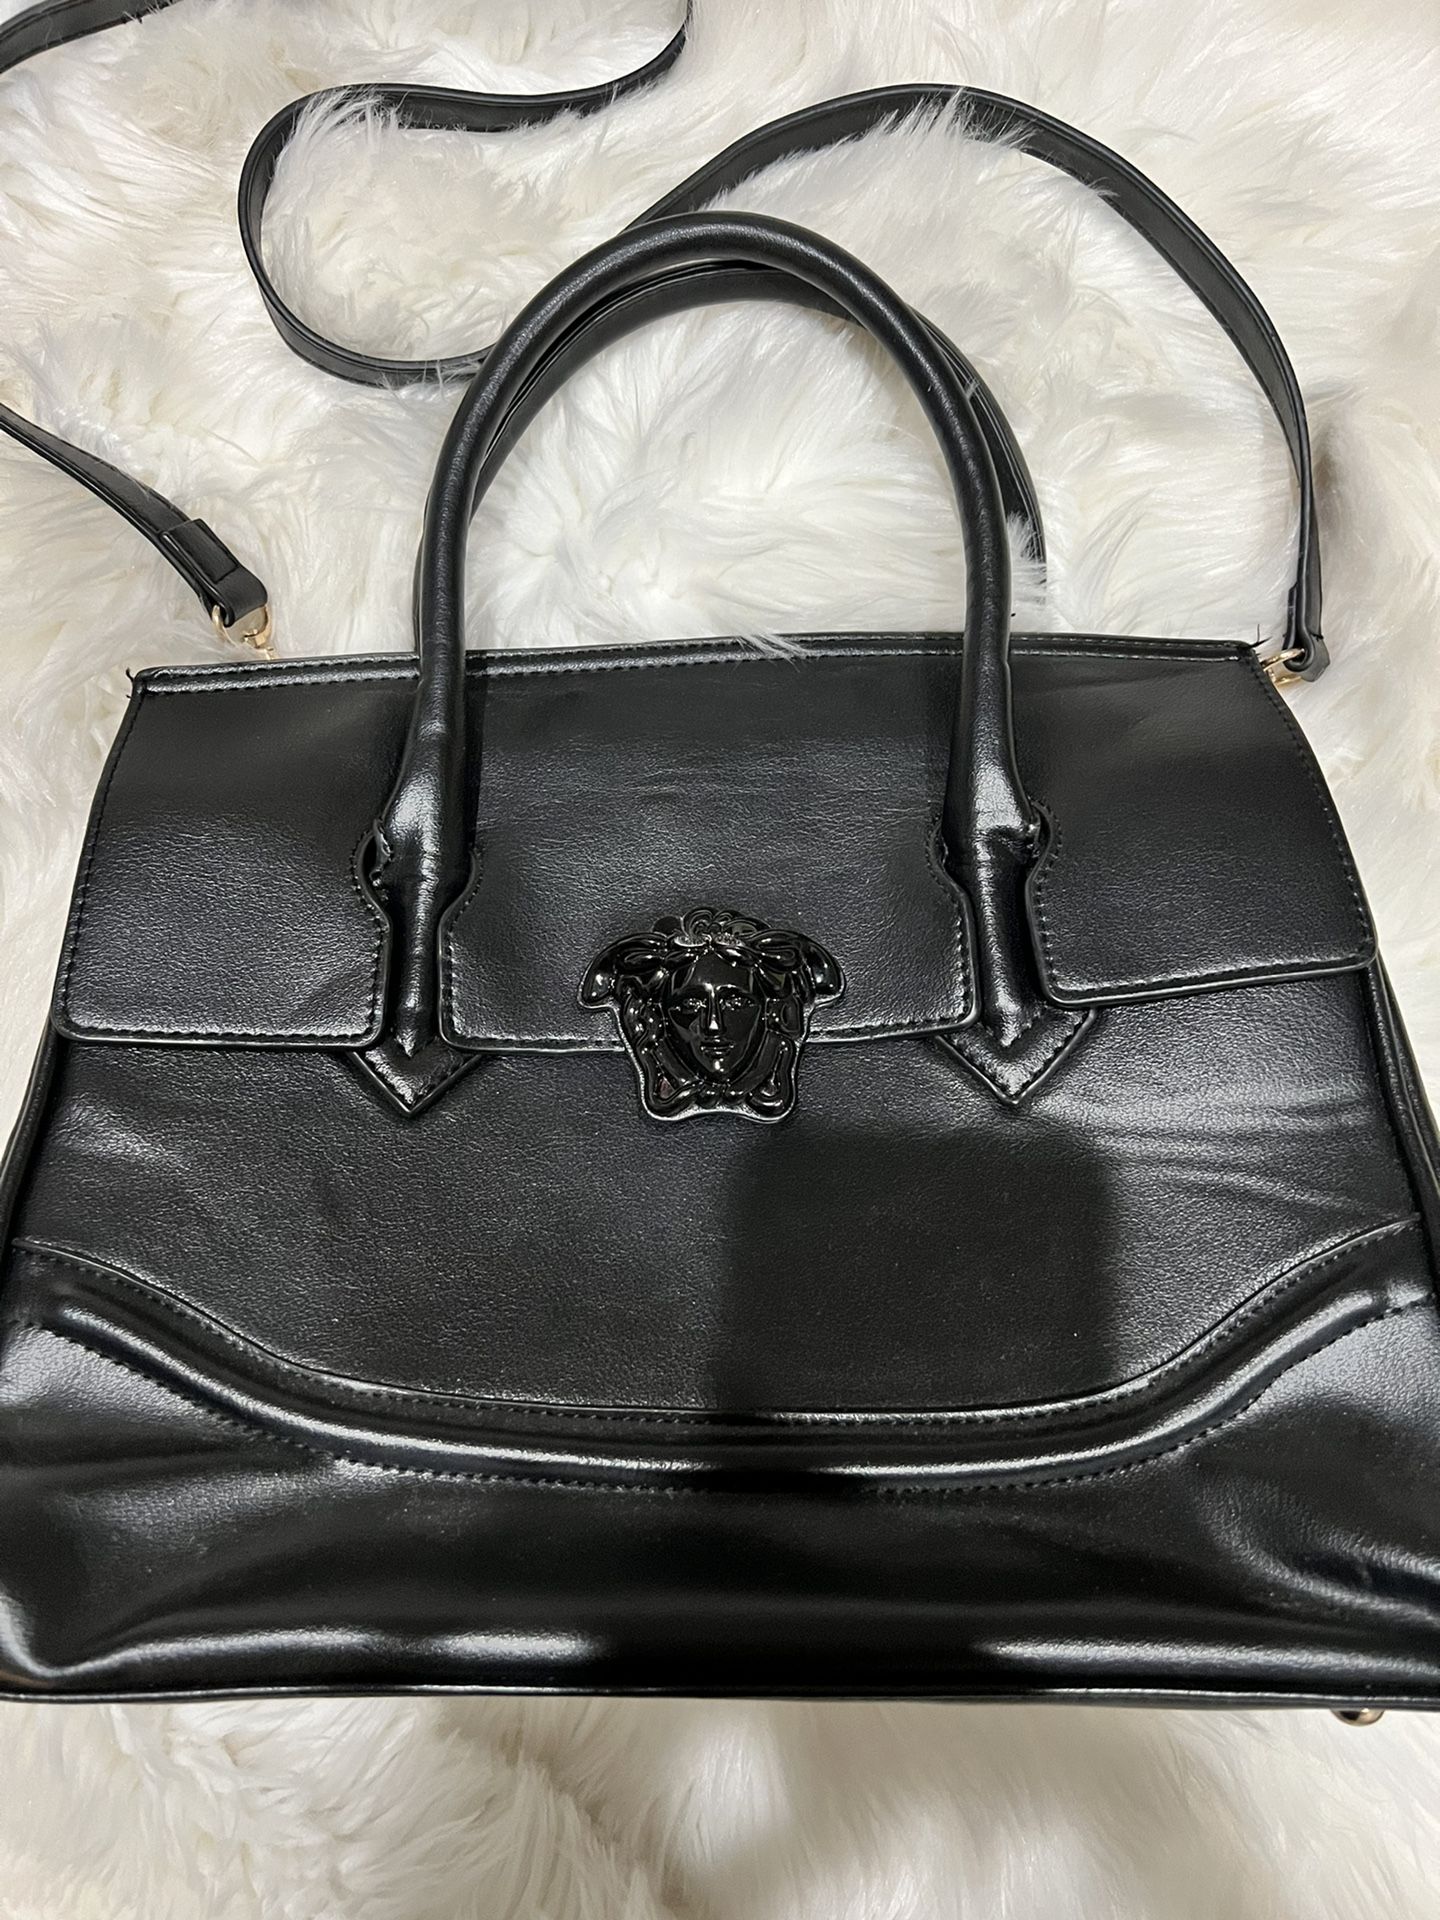 Versace bag for Sale in Snohomish, WA - OfferUp